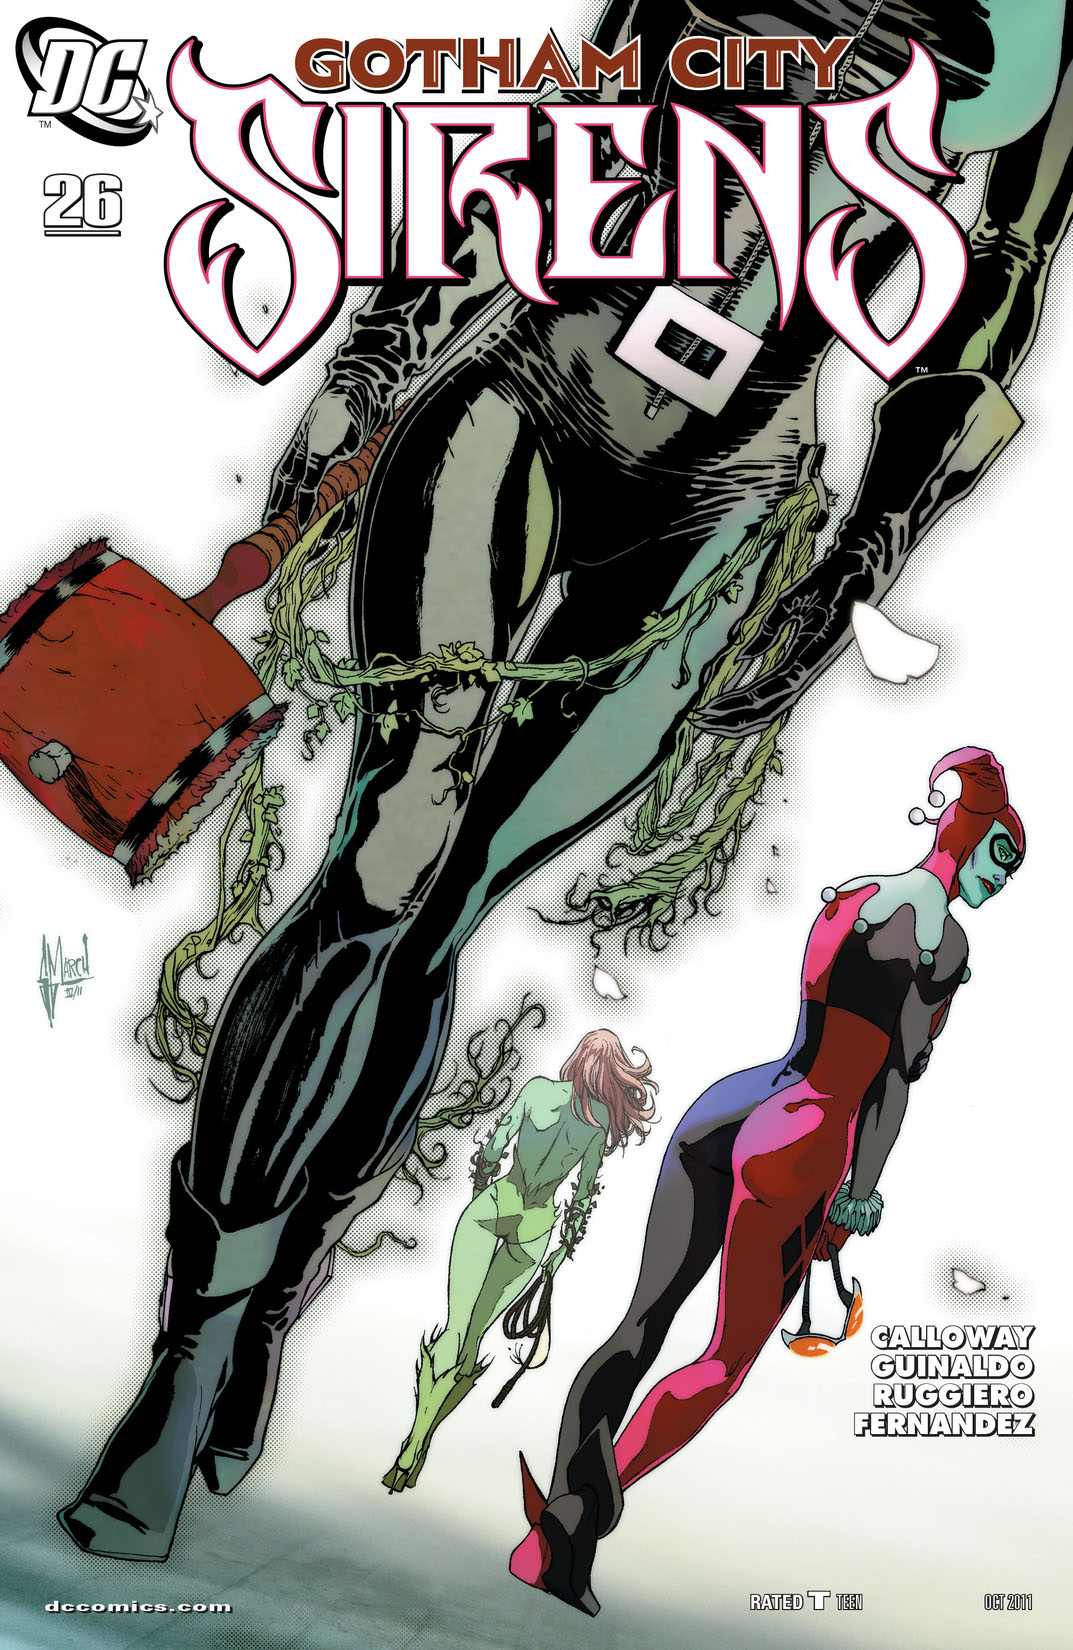 Gotham City Sirens #26 preview images